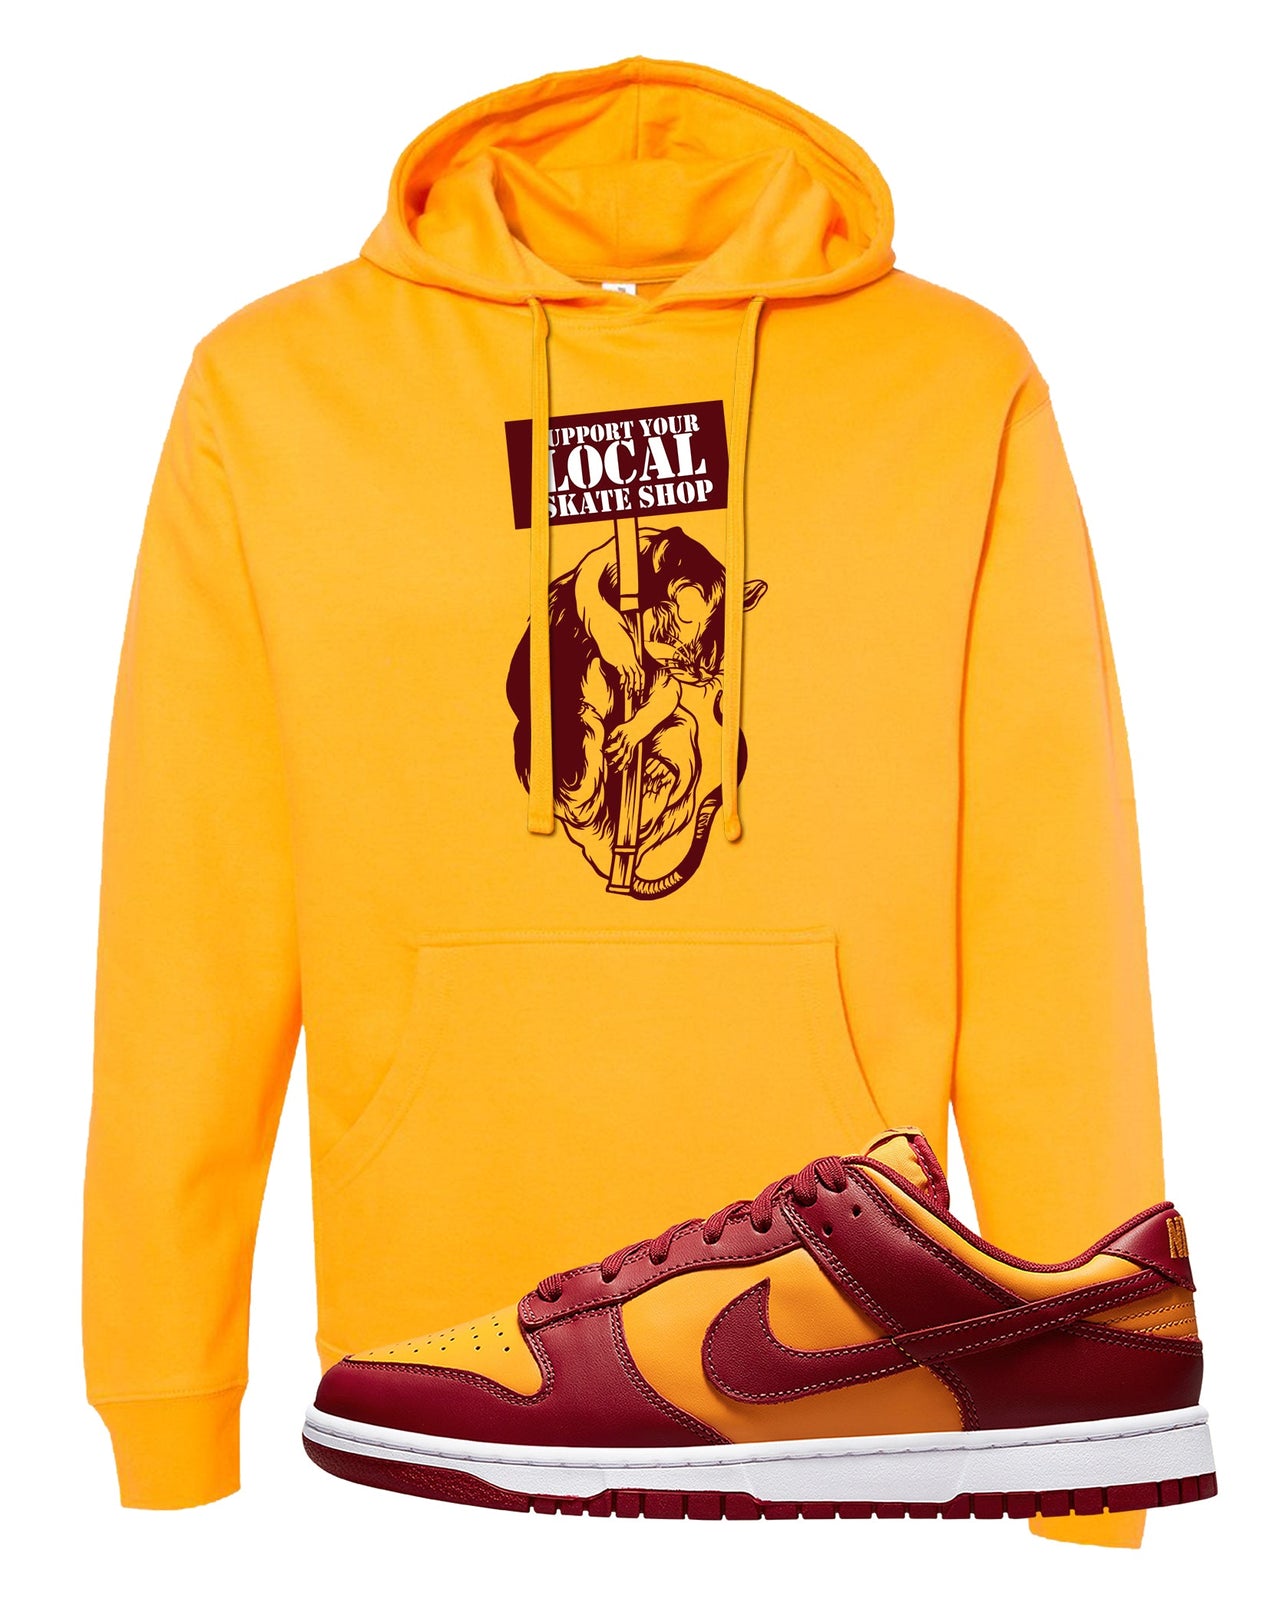 Midas Gold Low Dunks Hoodie | Support Your Local Skate Shop, Gold